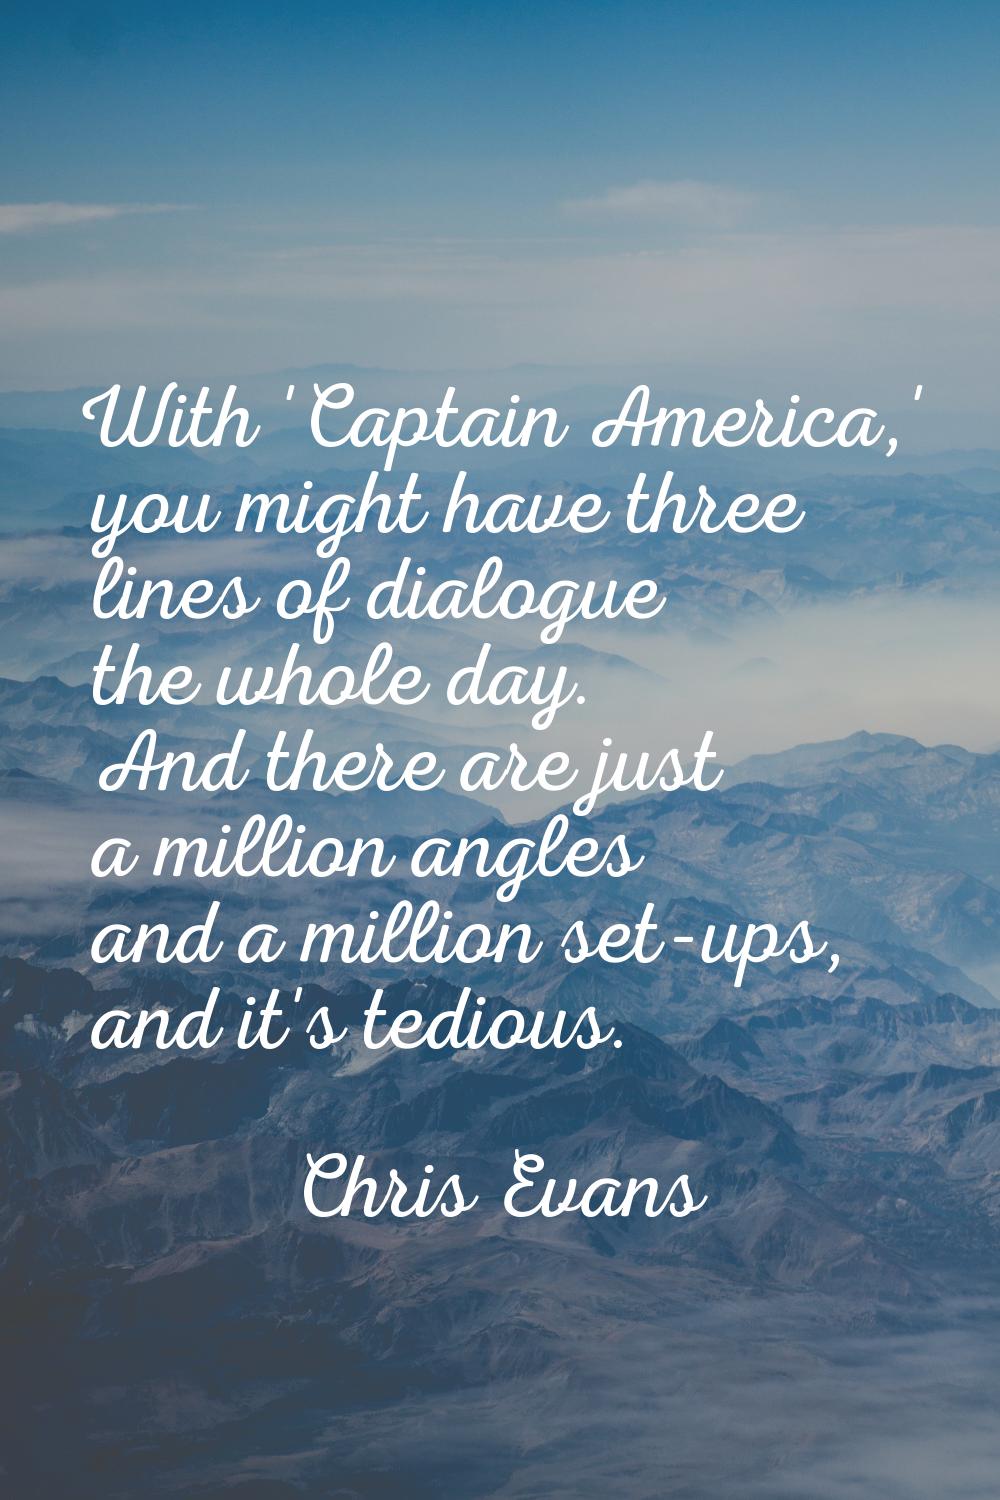 With 'Captain America,' you might have three lines of dialogue the whole day. And there are just a 